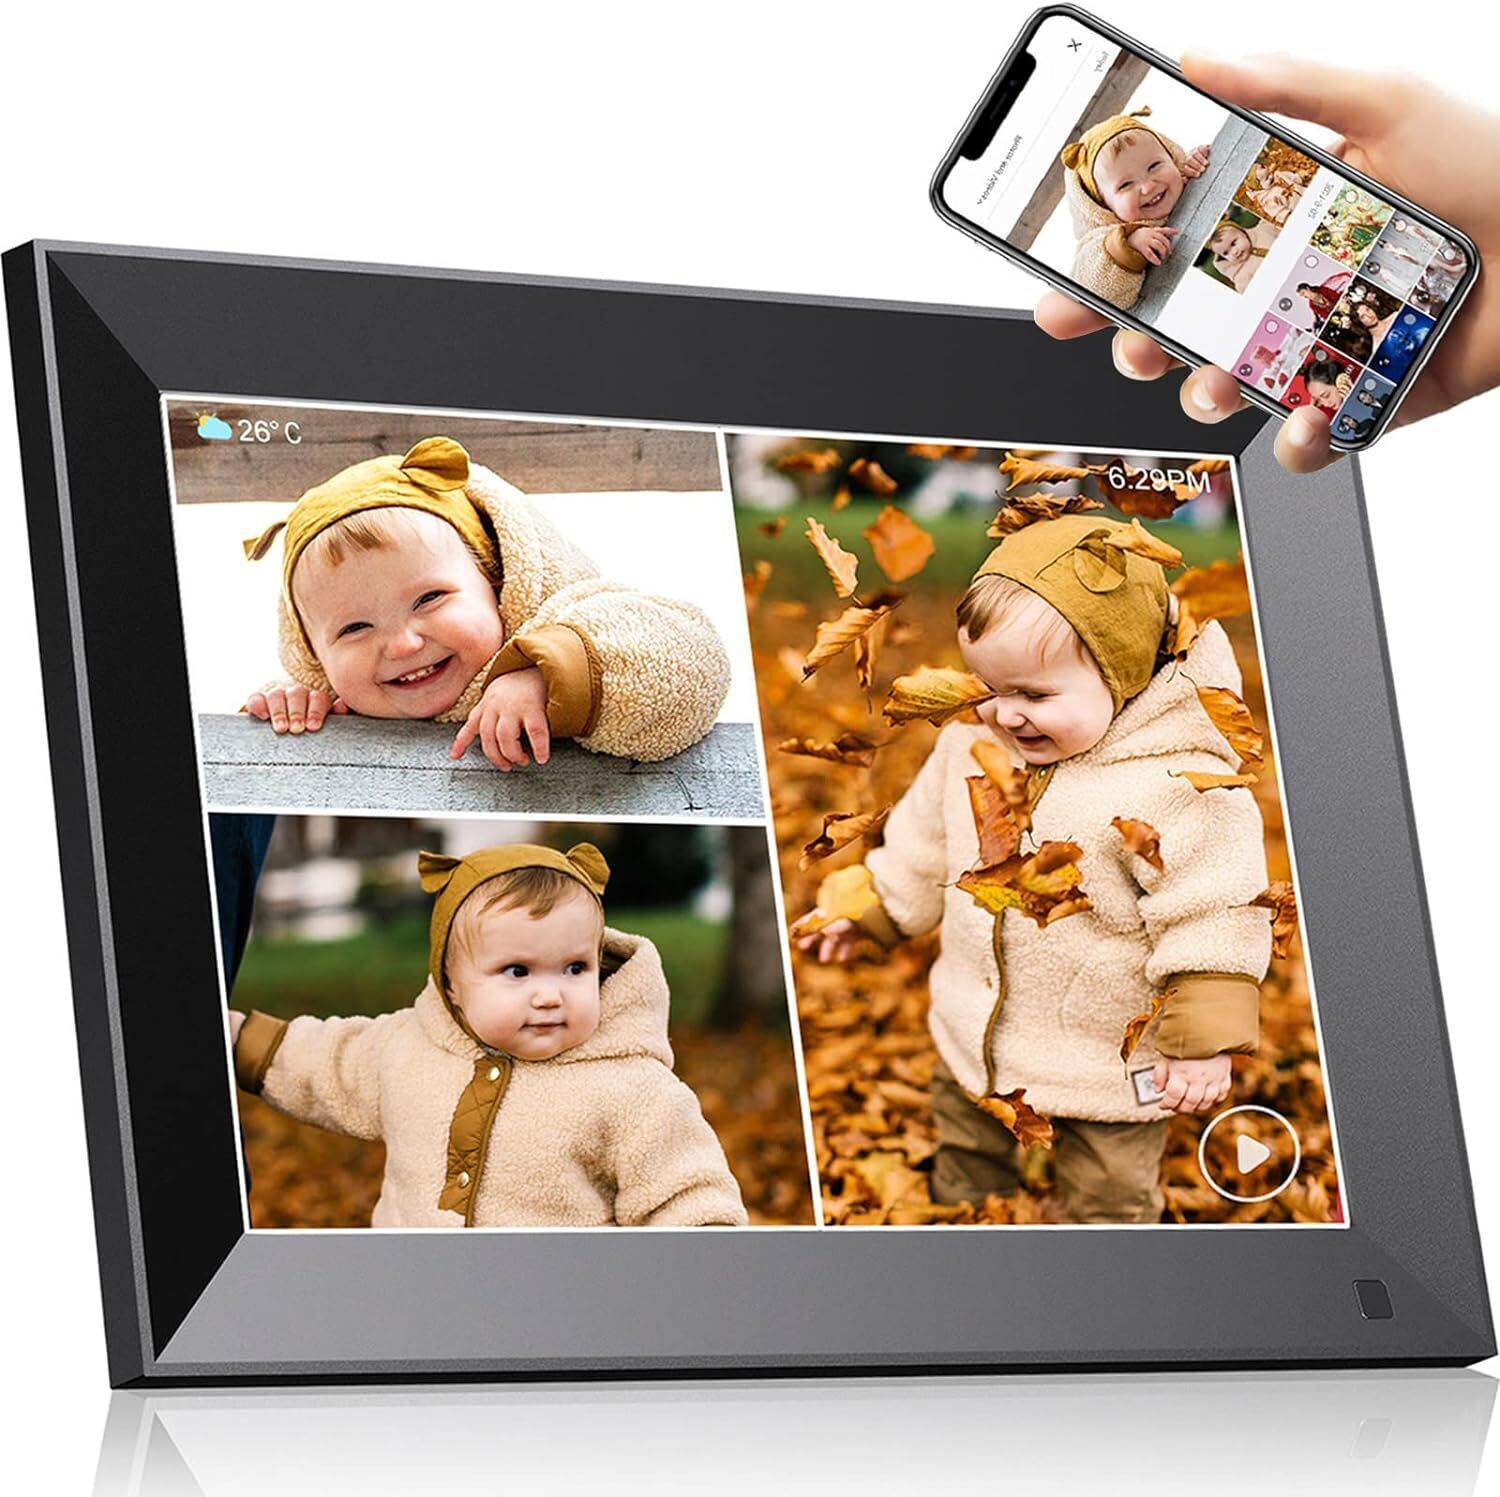 Digital Photo Frame 10.1 inch, Electronic Picture 